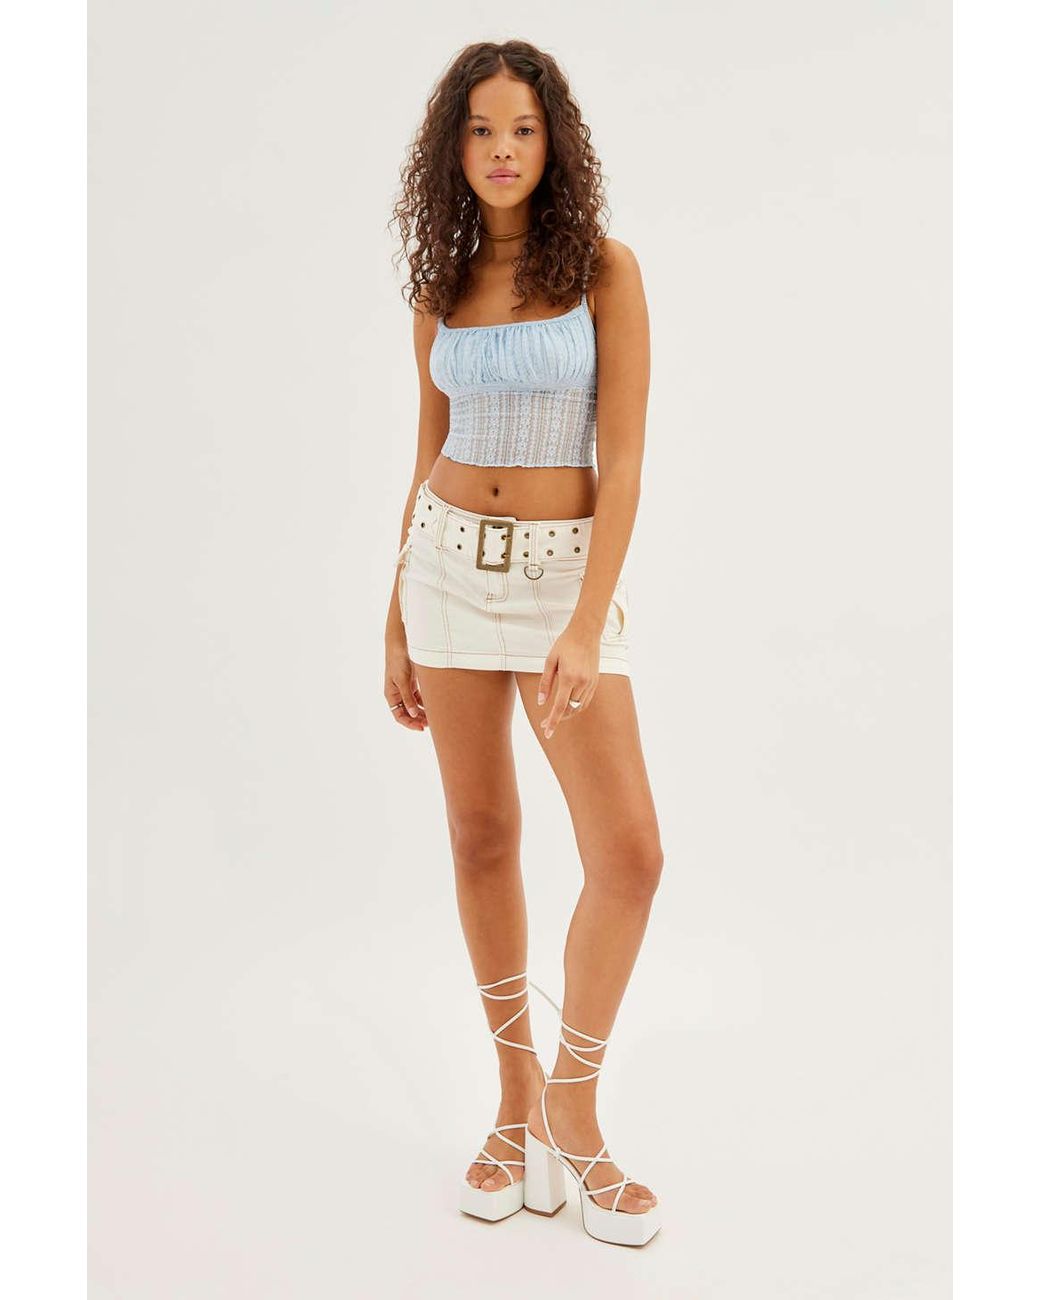 Urban Outfitters Chelsea Semi-Sheer Lace & Mesh Cami - ShopStyle